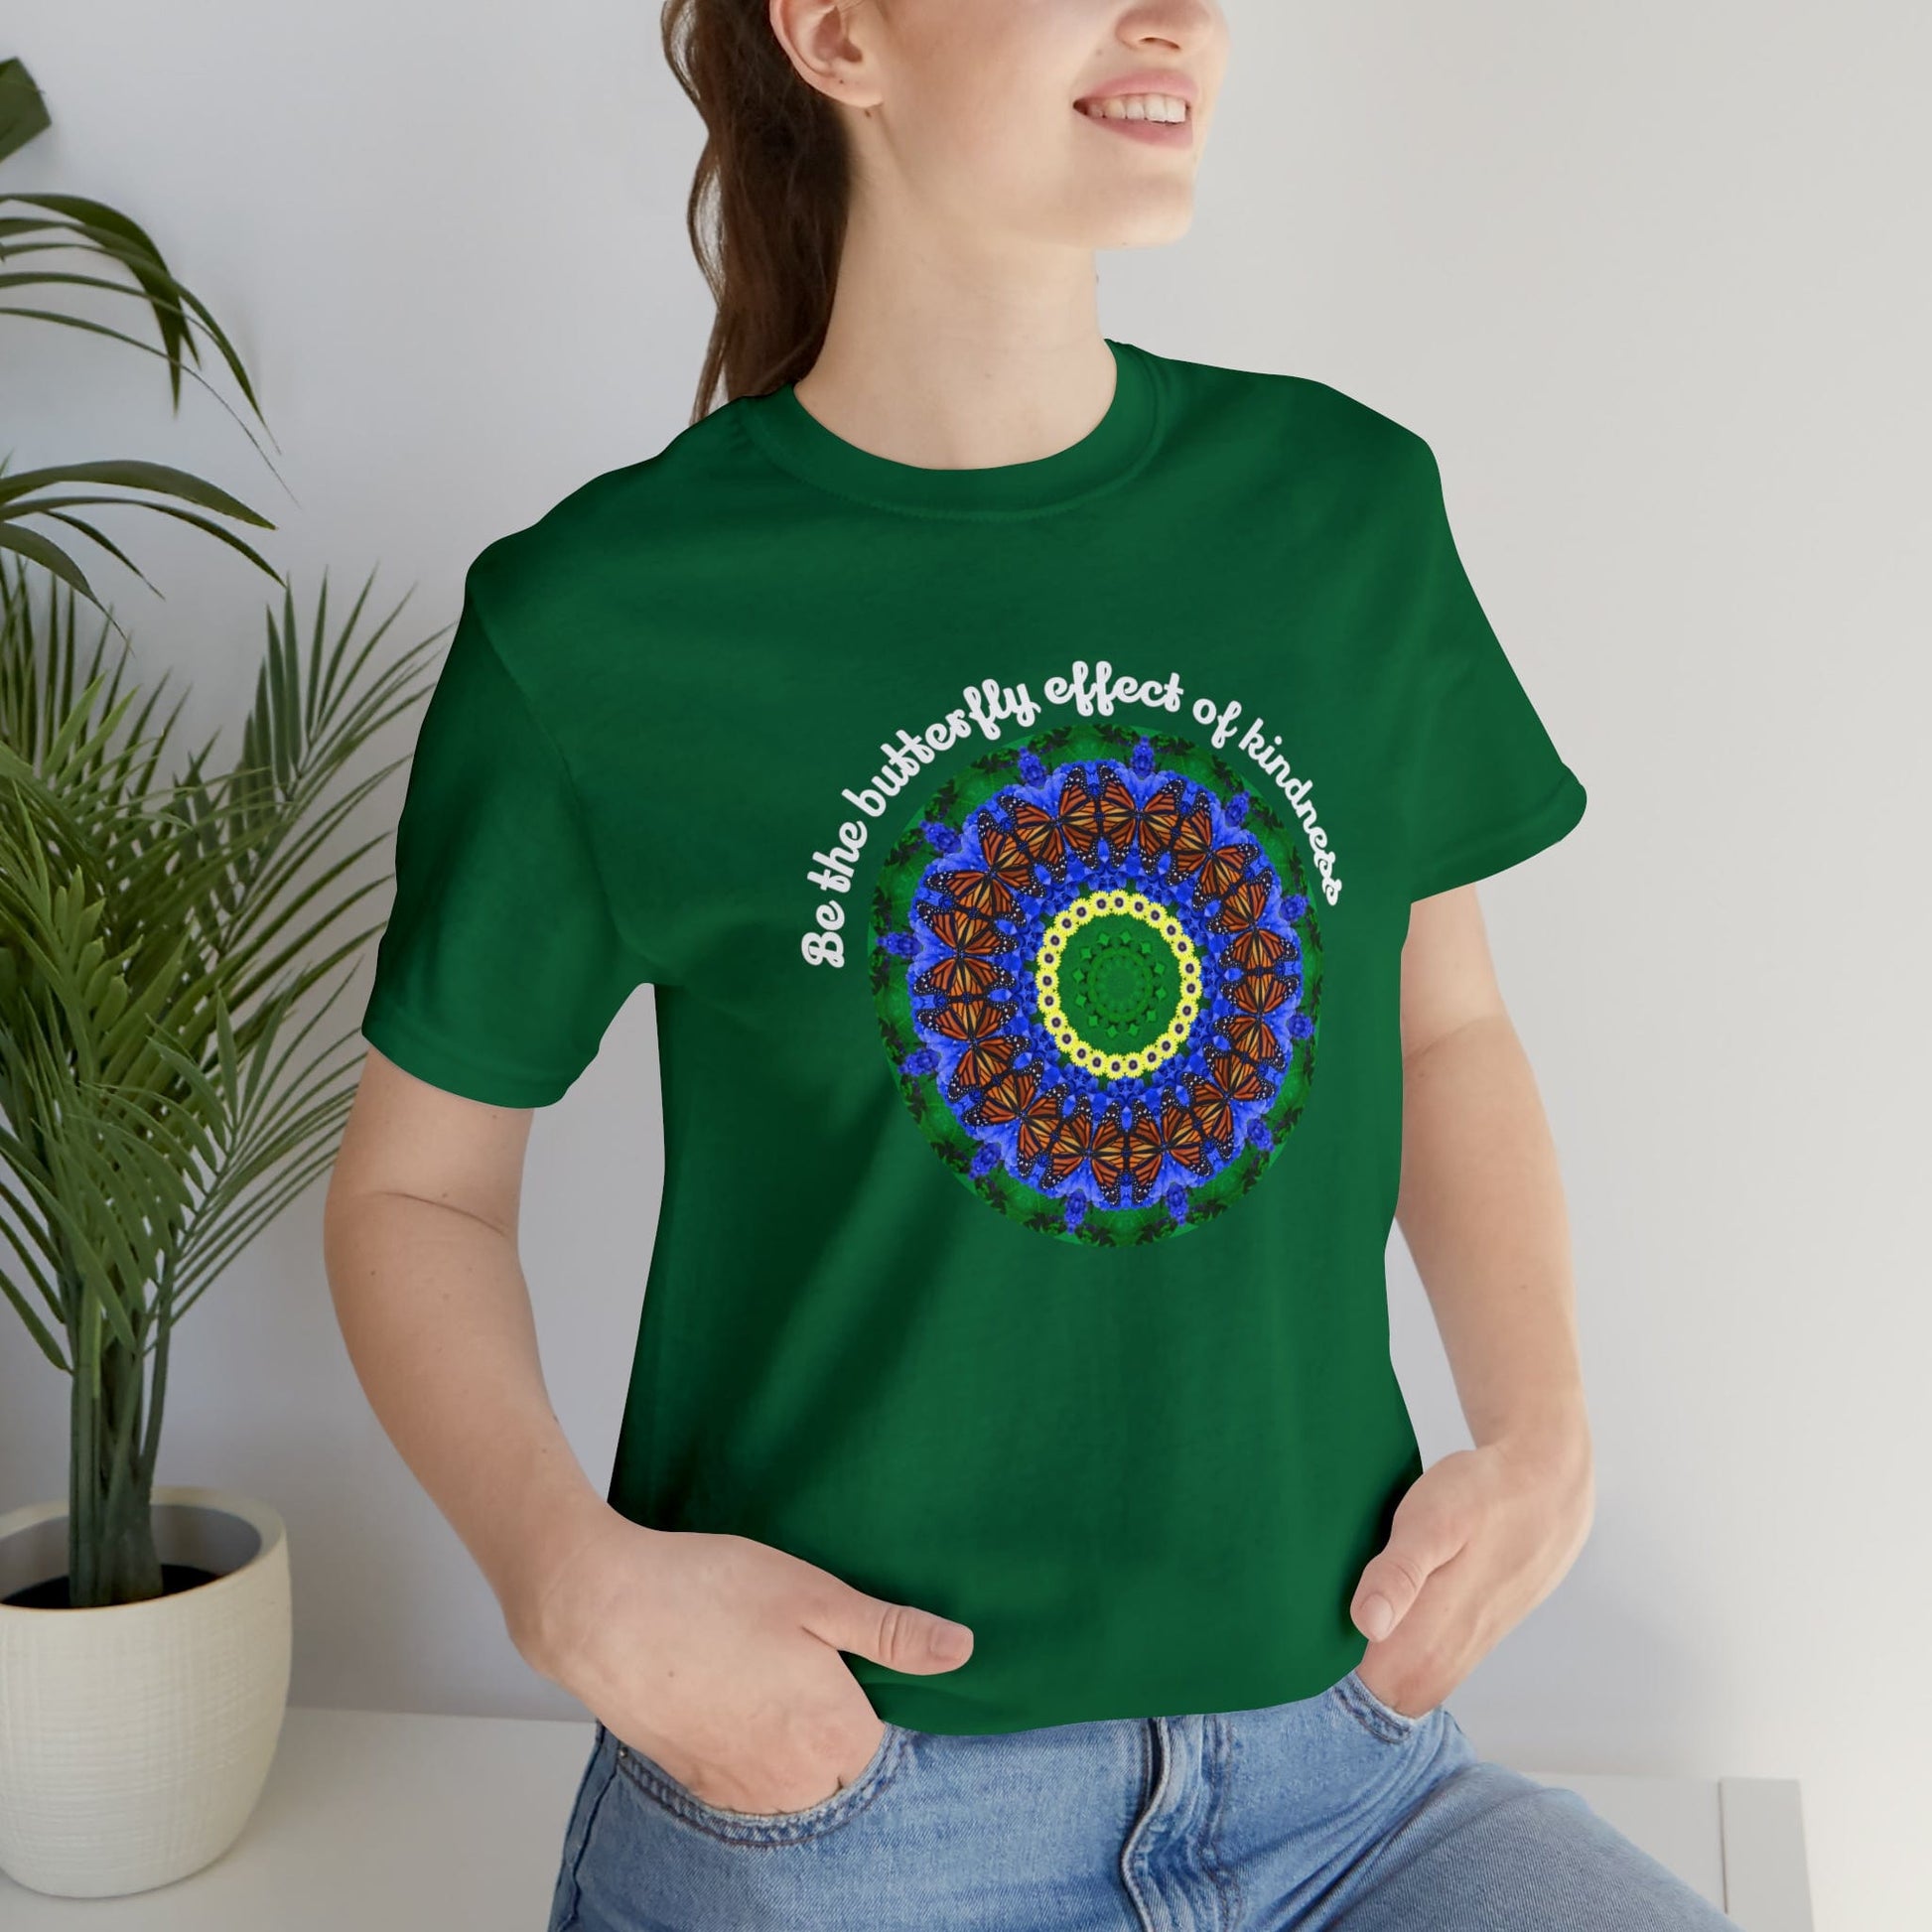 Cute Graphic Kindness Shirts  - Beautiful Monarch Butterfly Mandala Art For Positive Vibes – Butterfly Effect Kelly Green